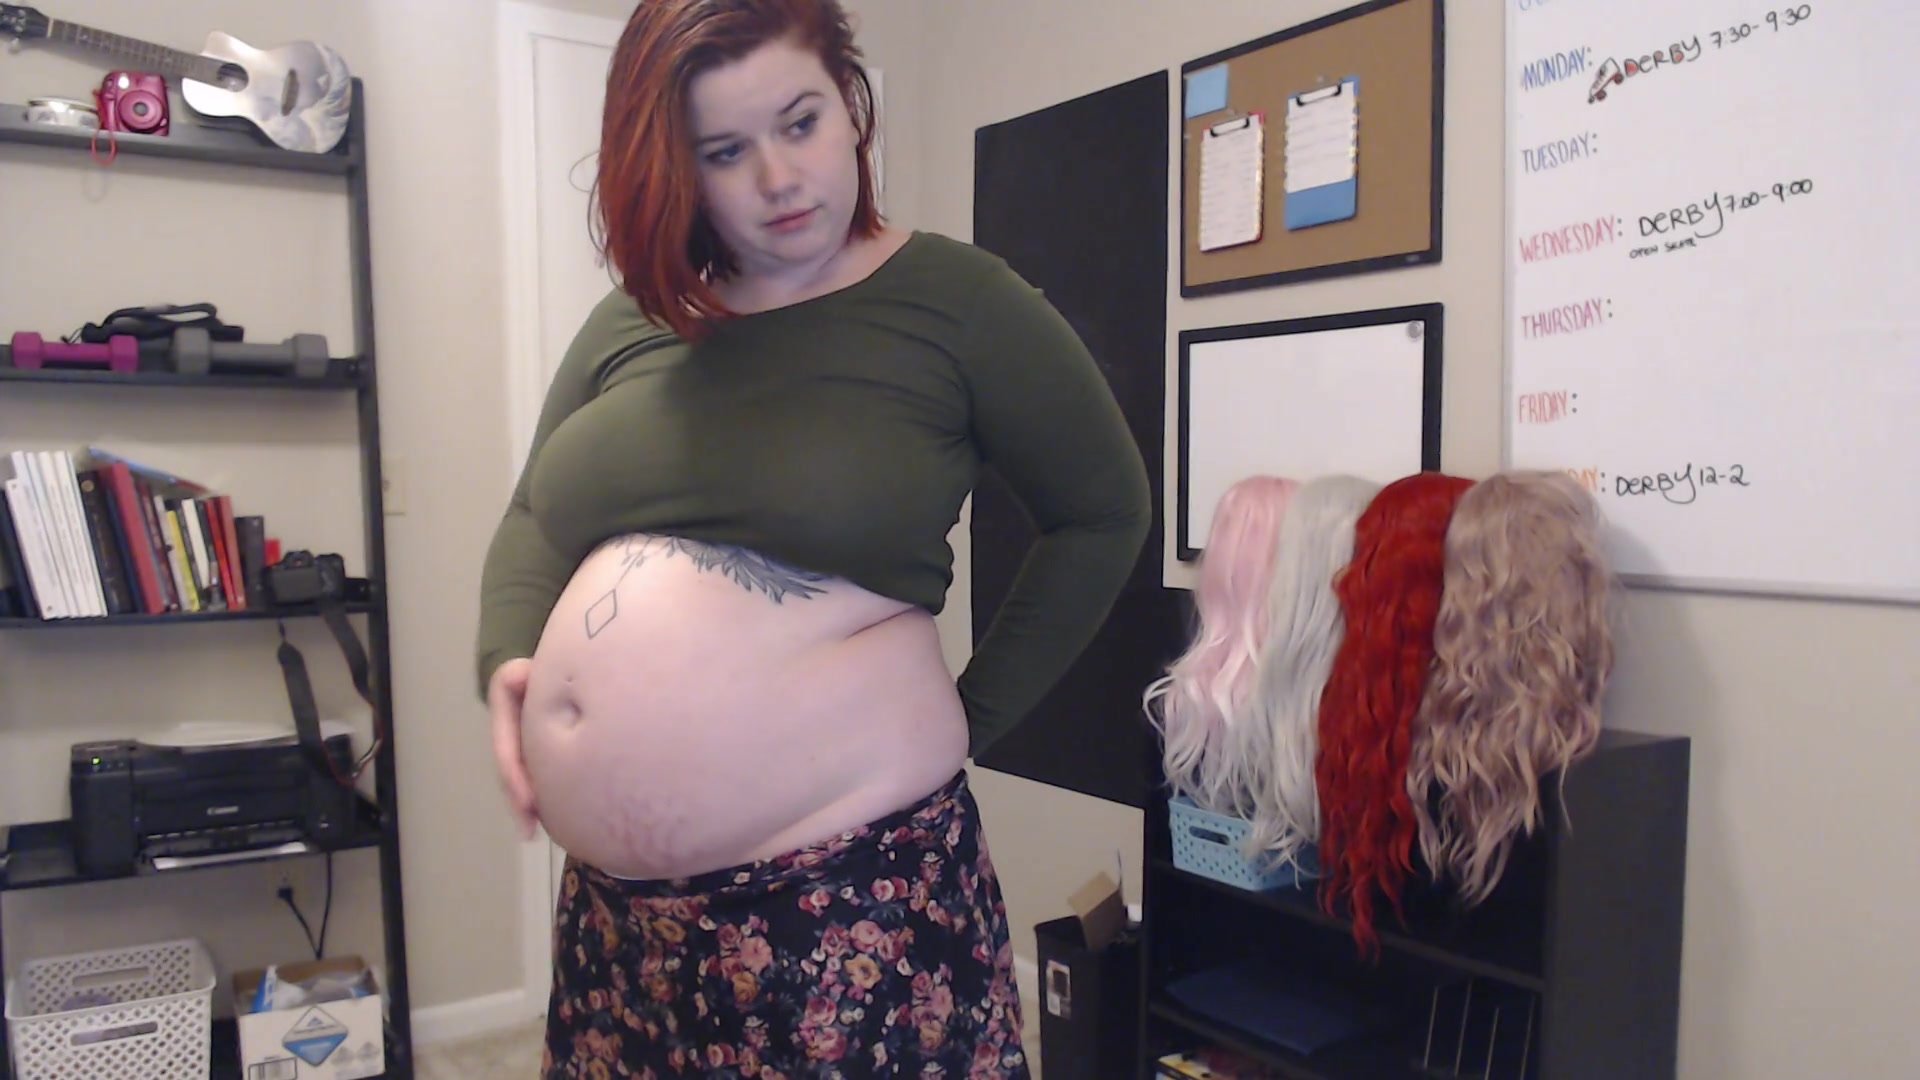 chubby girl show her belly